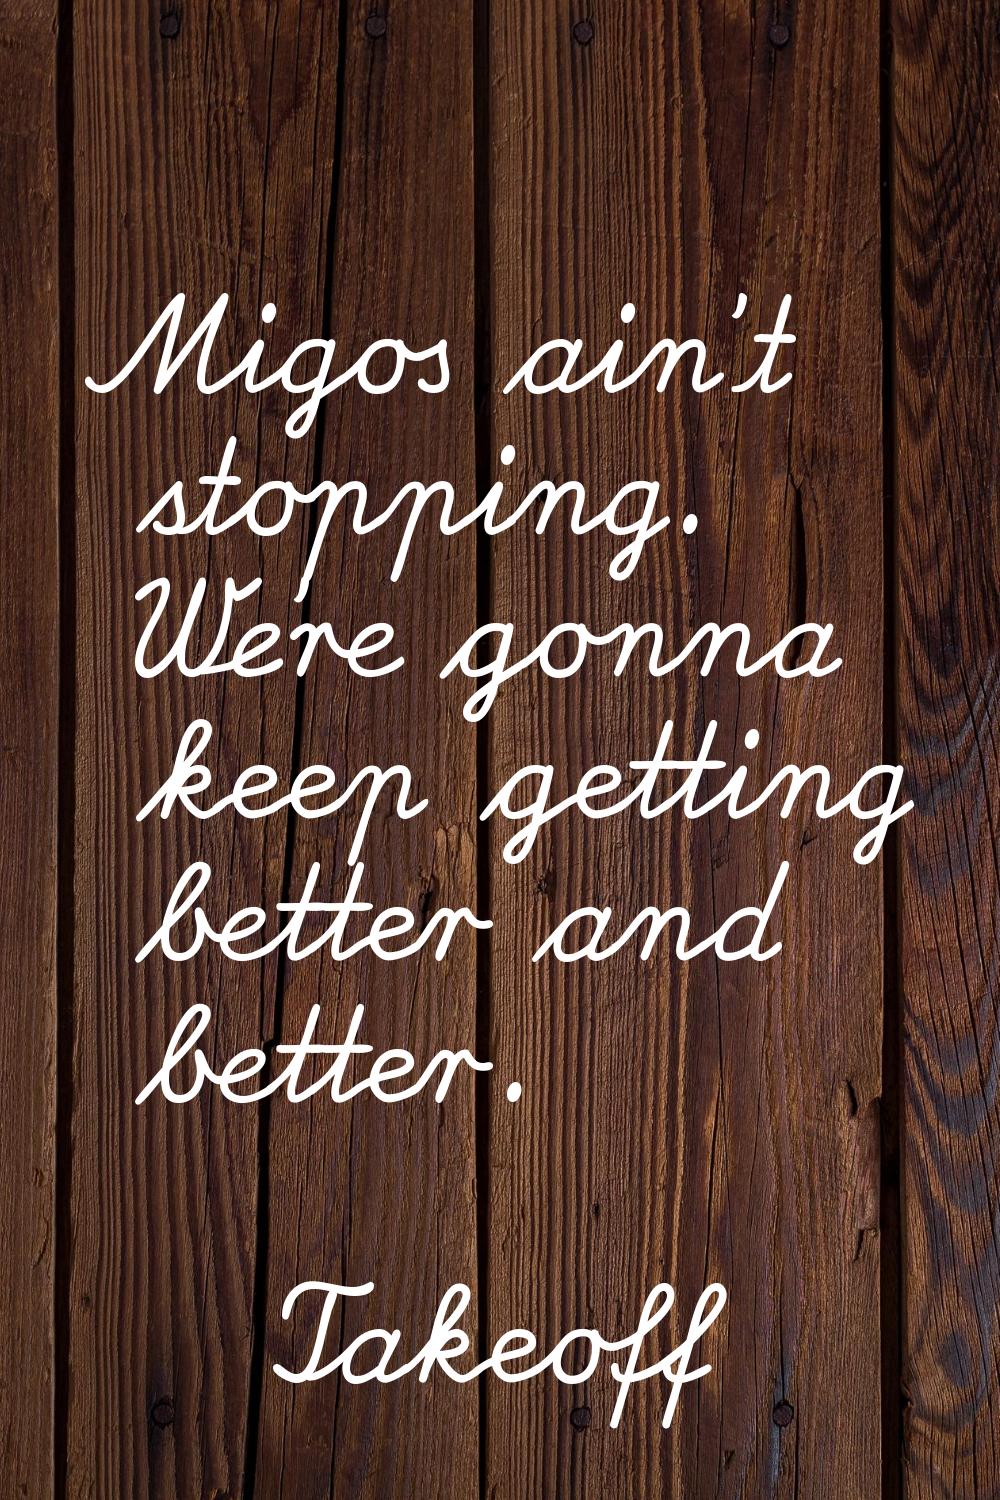 Migos ain't stopping. We're gonna keep getting better and better.